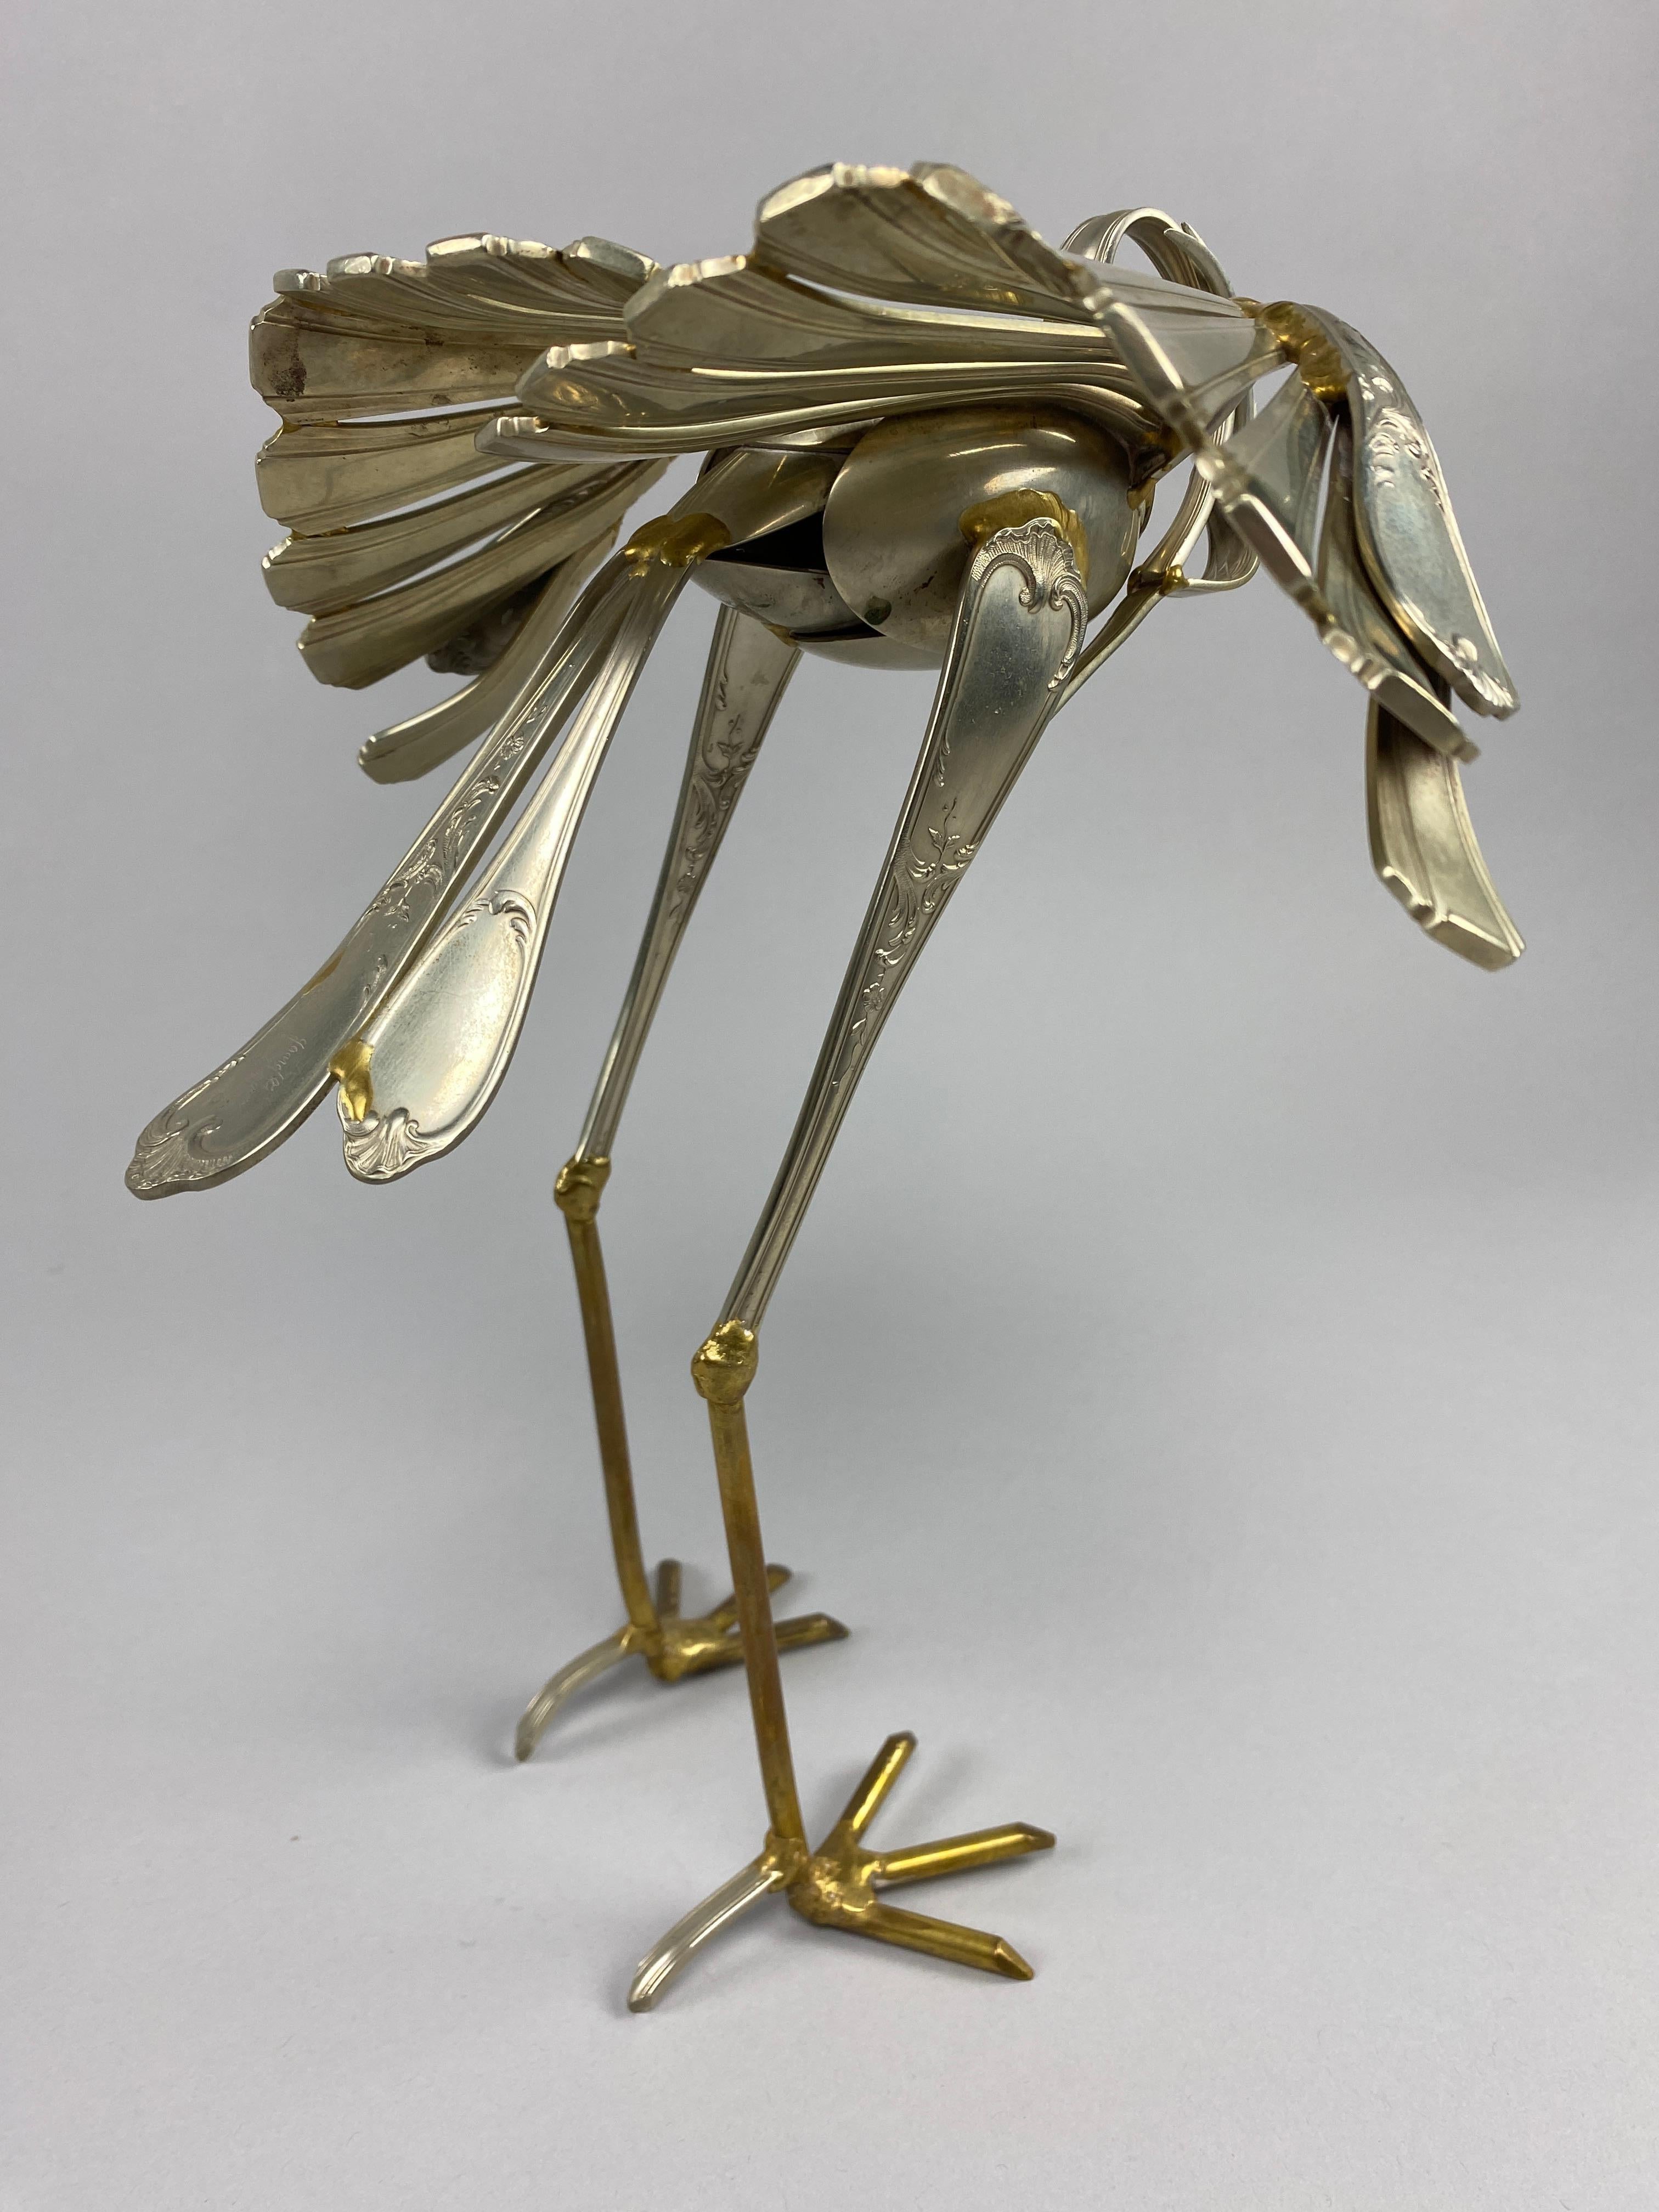 Silvered Unique Heron Cutlery Sculpture by Gerard Bouvier For Sale